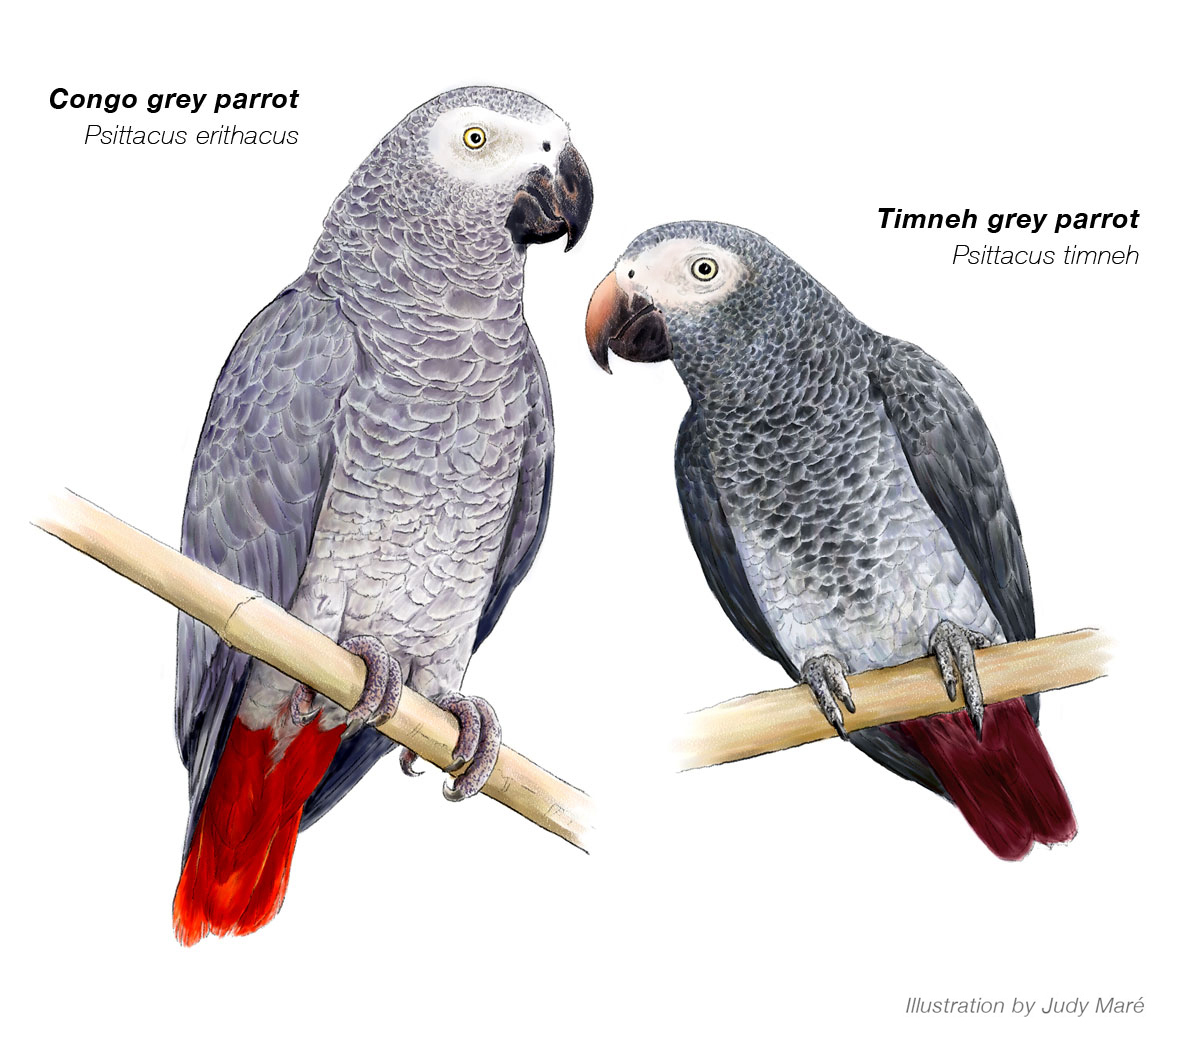 grey-parrot-illustration-africa-geographic